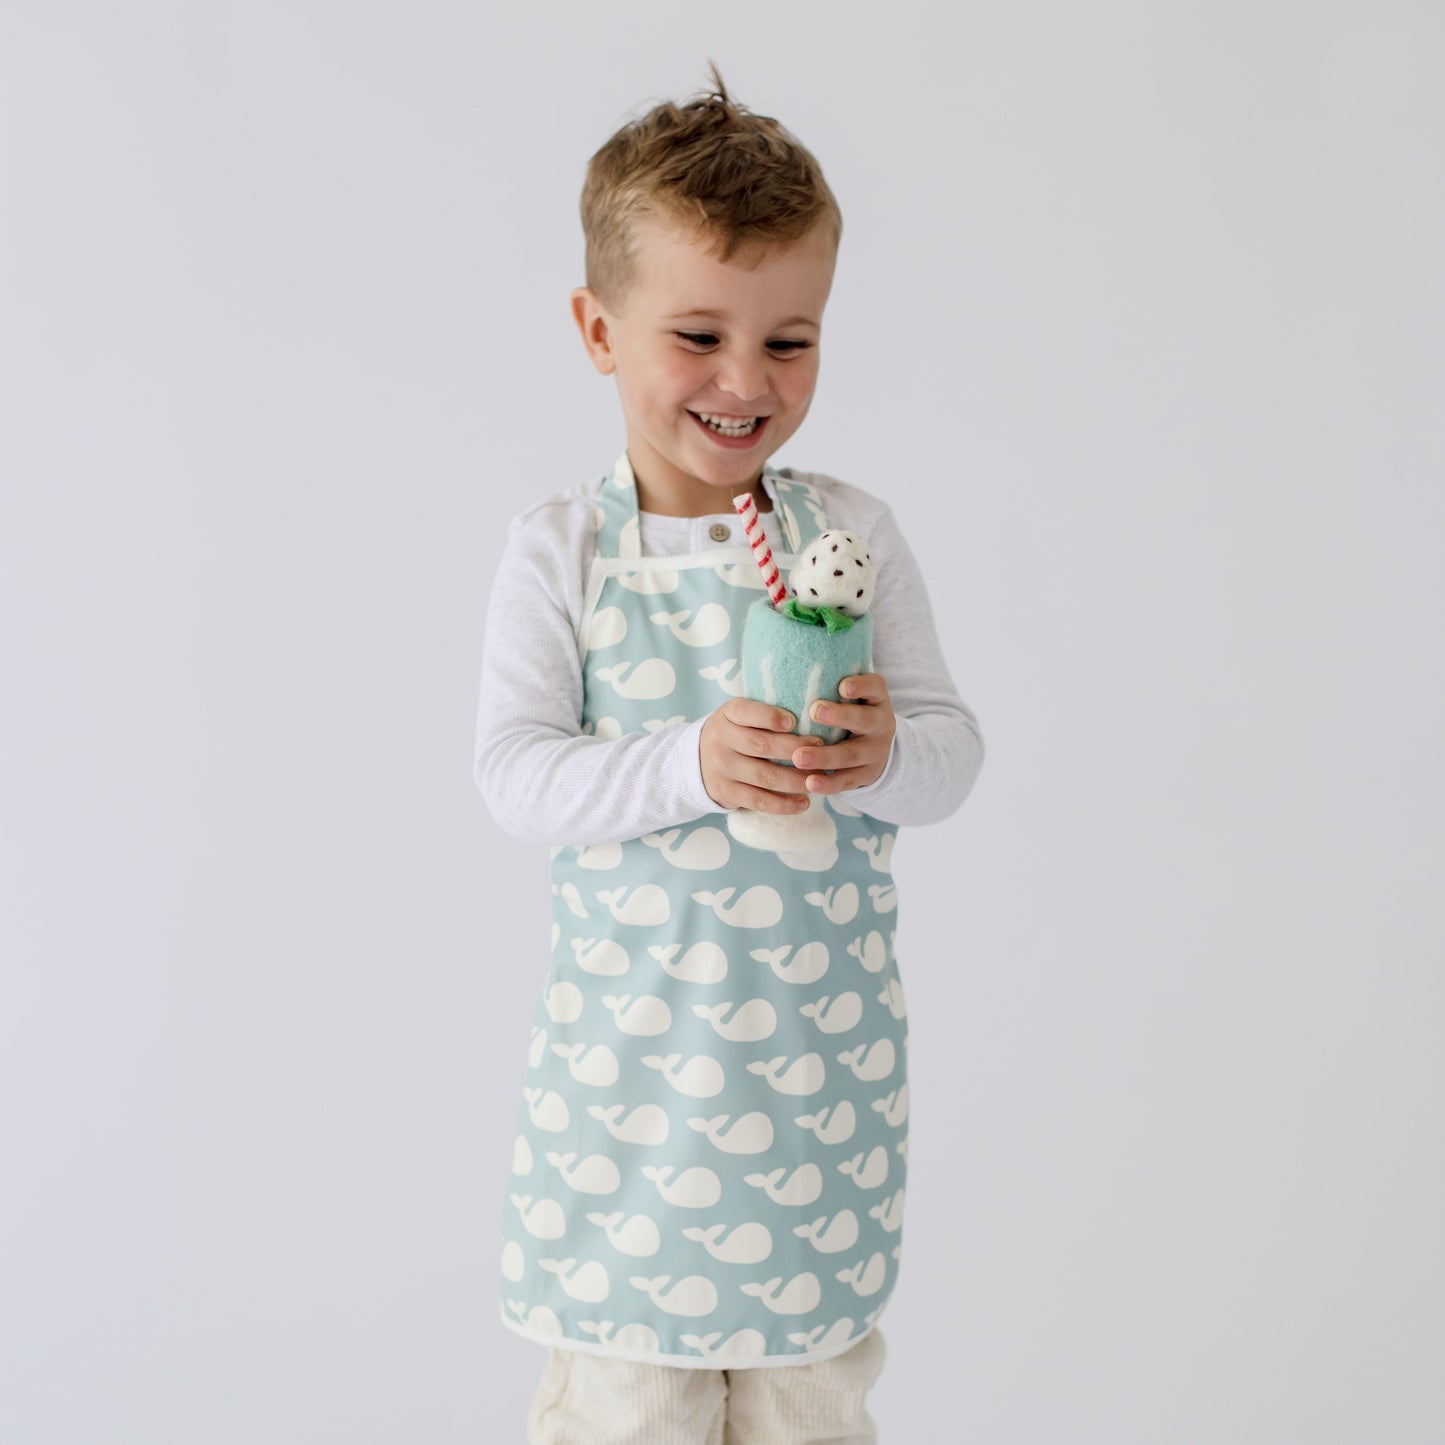 Toddler Apron - Whales